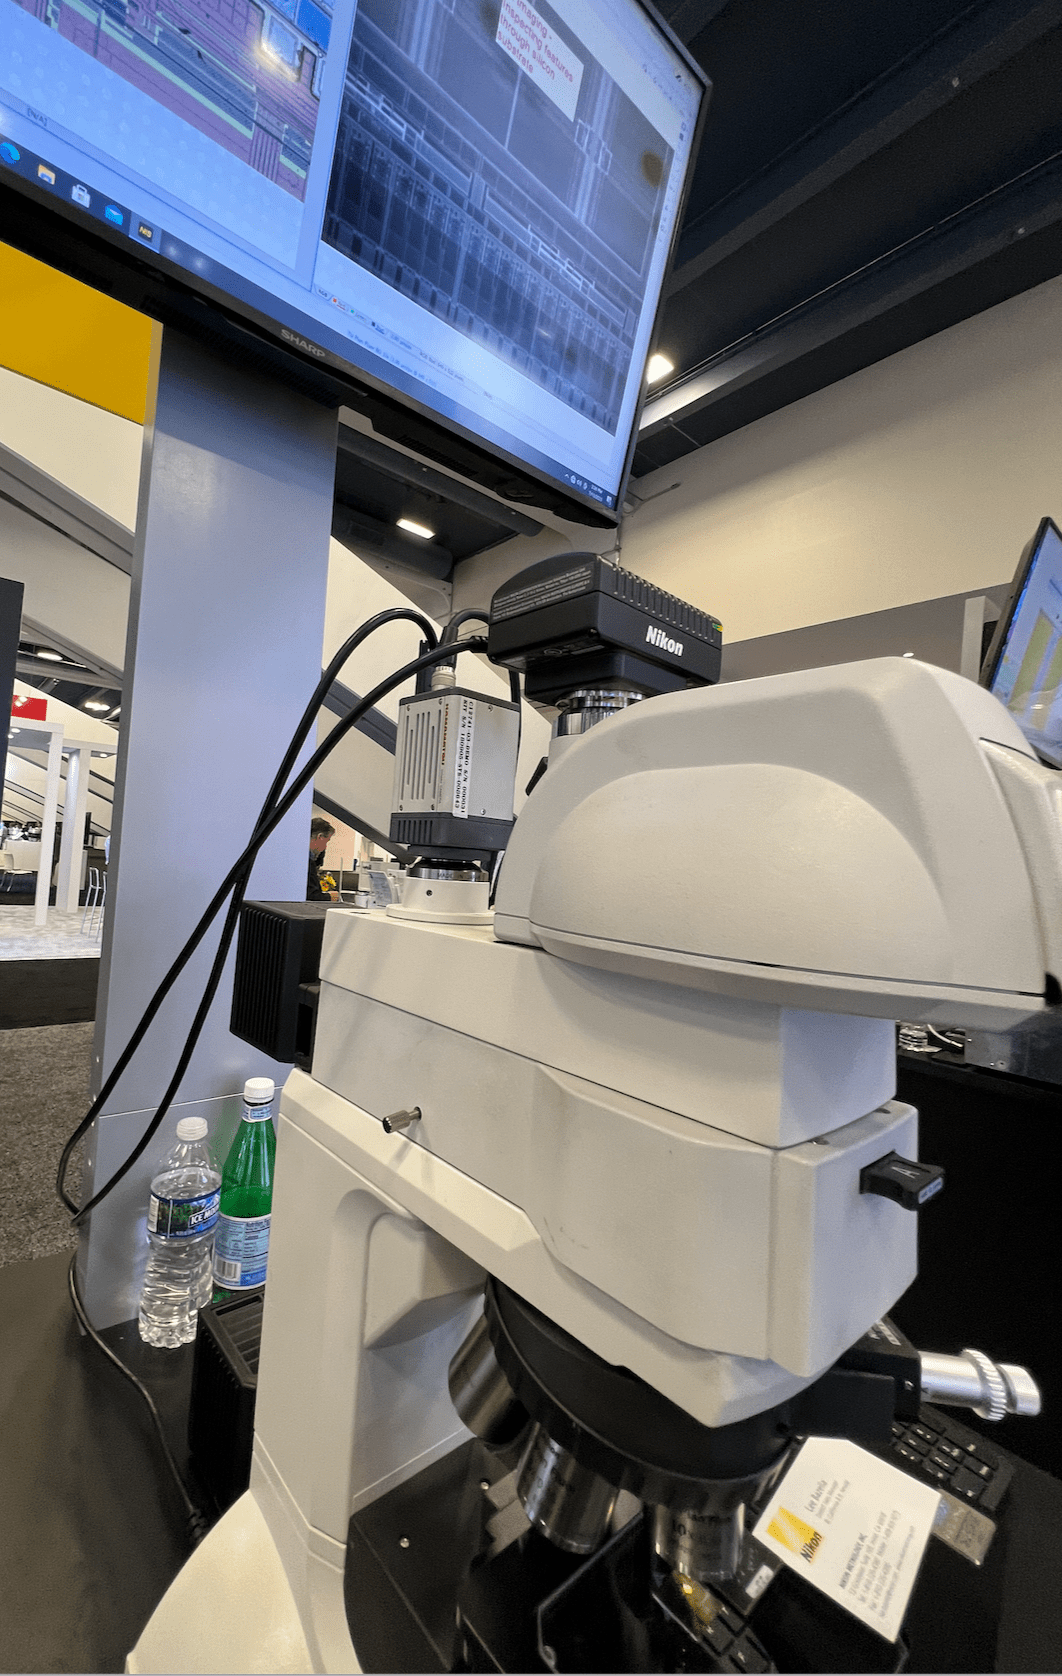 Nikon camera attached to an infrared camera on a microscope makes it possible to see through silicon layers, at the Nikon booth, Semicon West 2023. Source: Semiconductor Engineering/ Susan Rambo